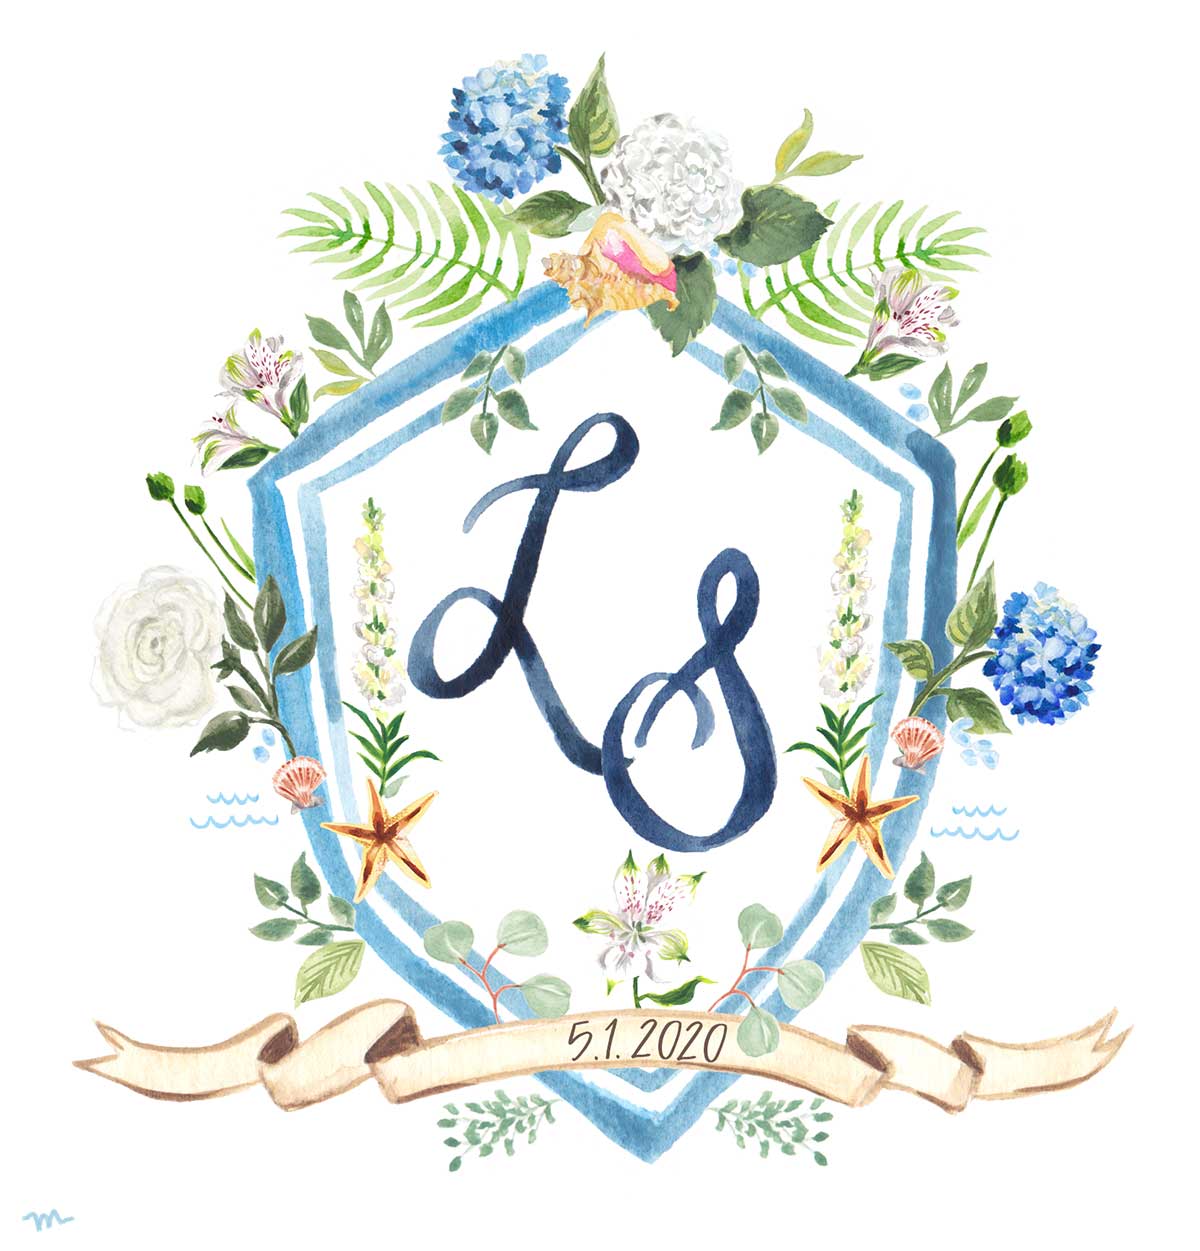 Hand-painted watercolor wedding crest for a beach wedding by artist Michelle Mospens. - Mospens Studio